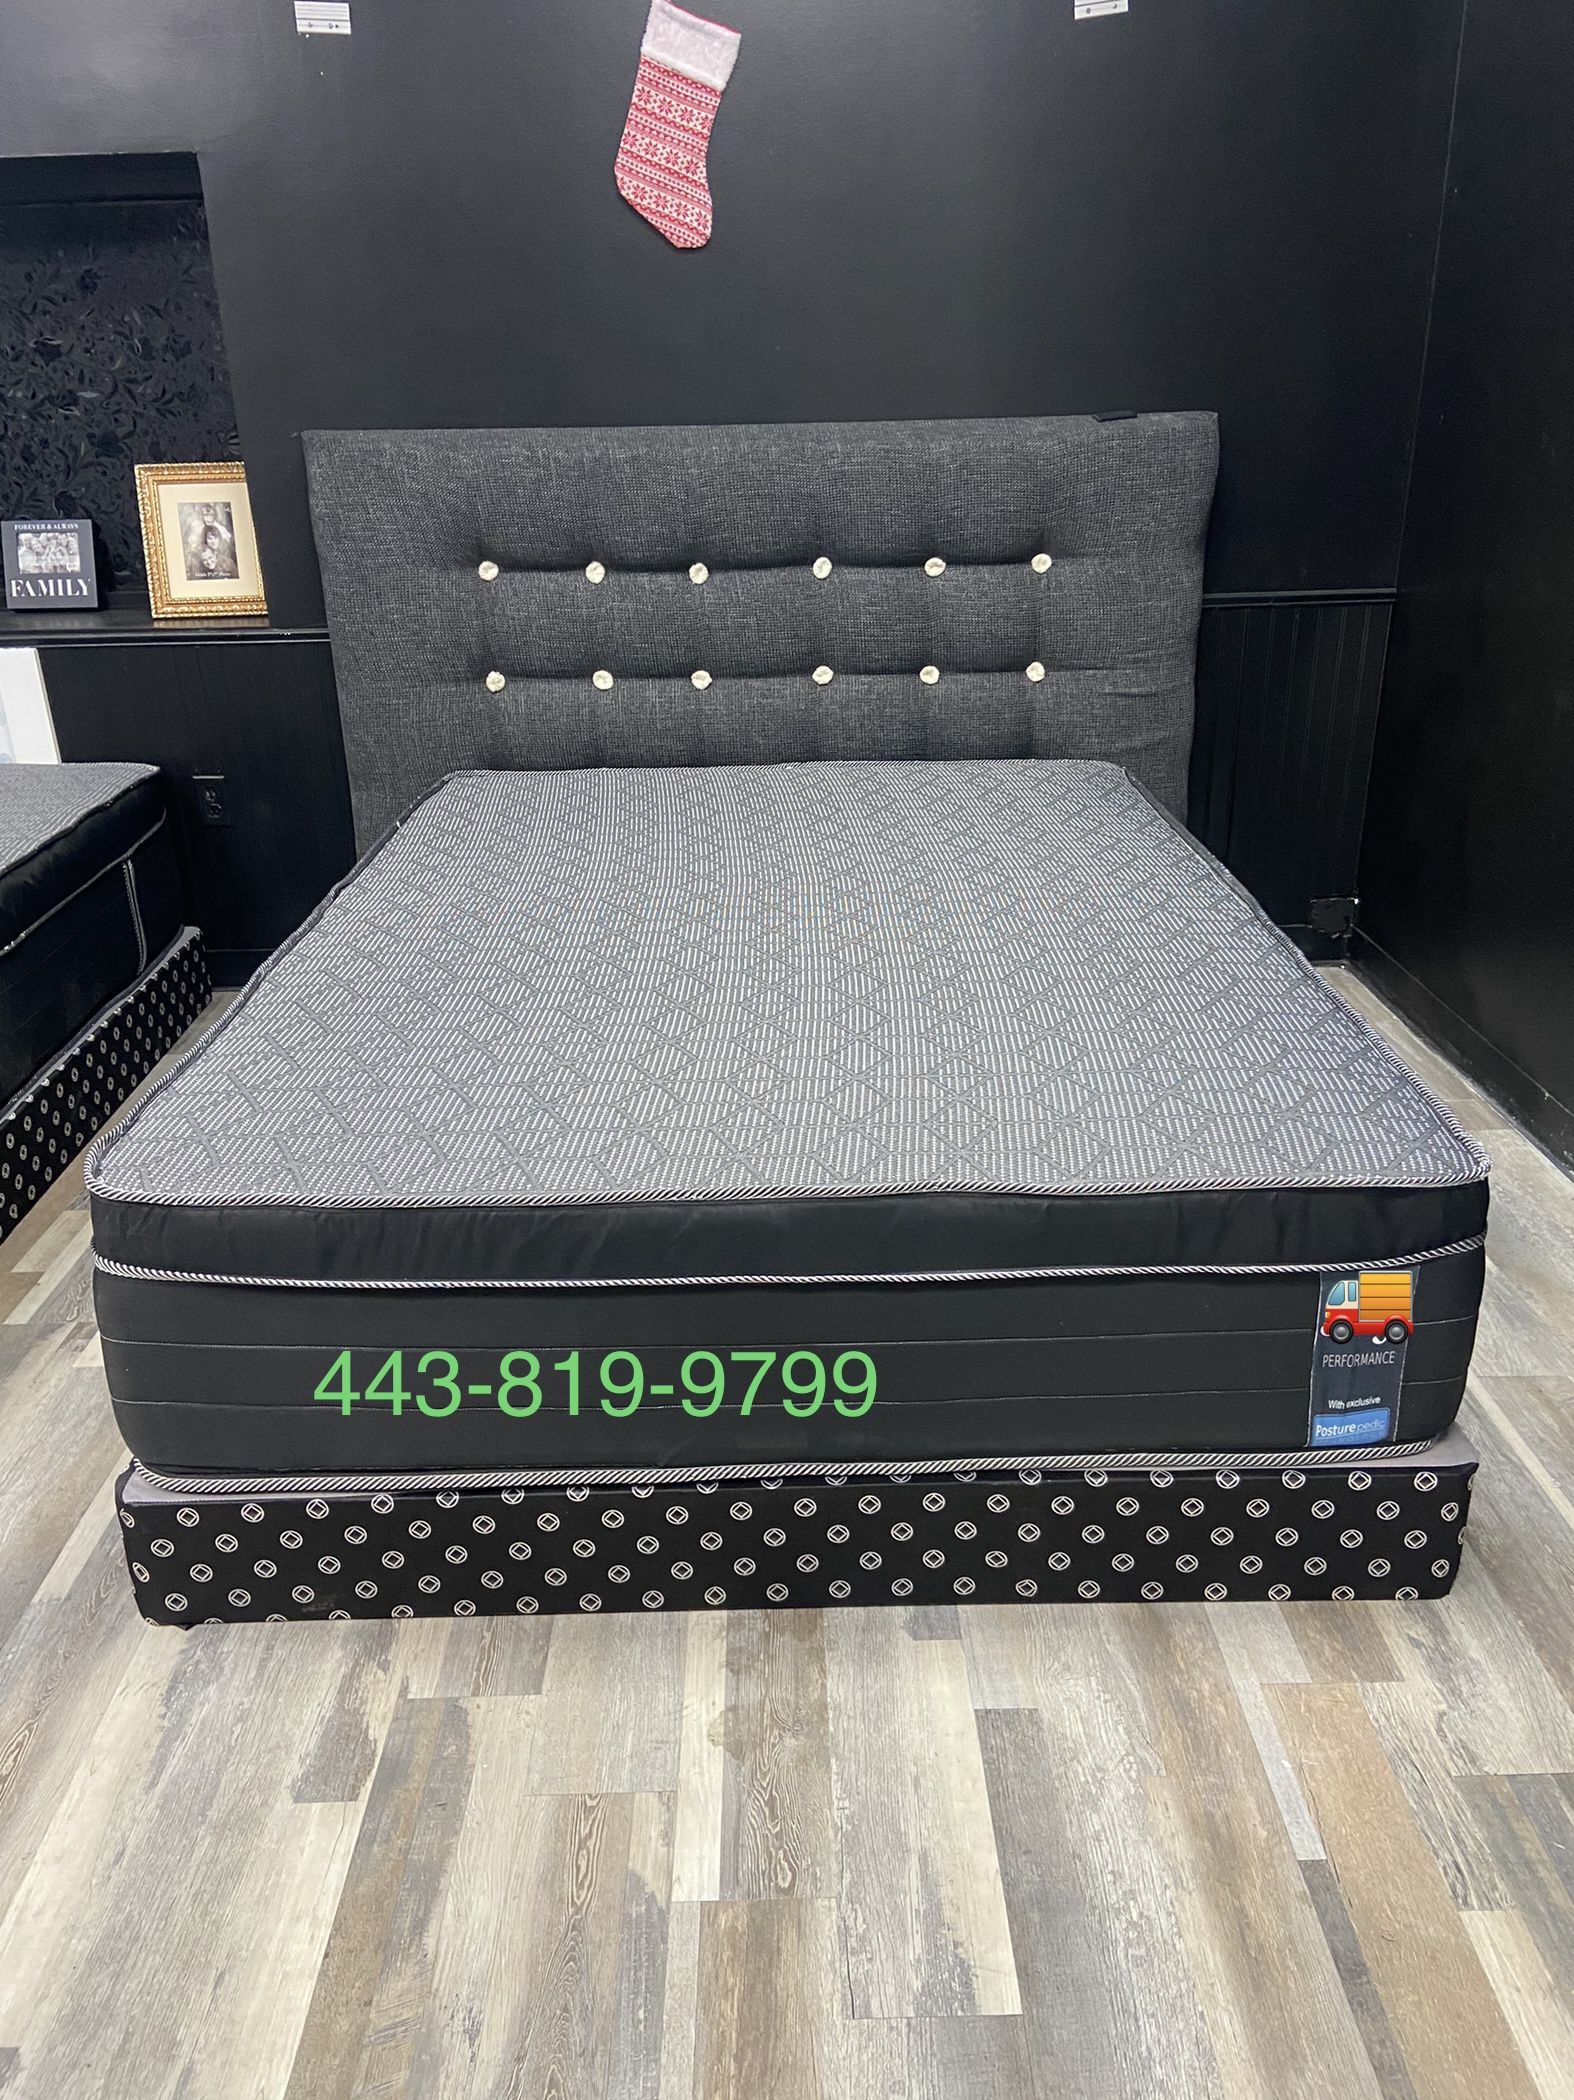 Queen Mattress - Double Sides - Come With Free Box Spring - Free Delivery 🚚 To Reasonable Distance